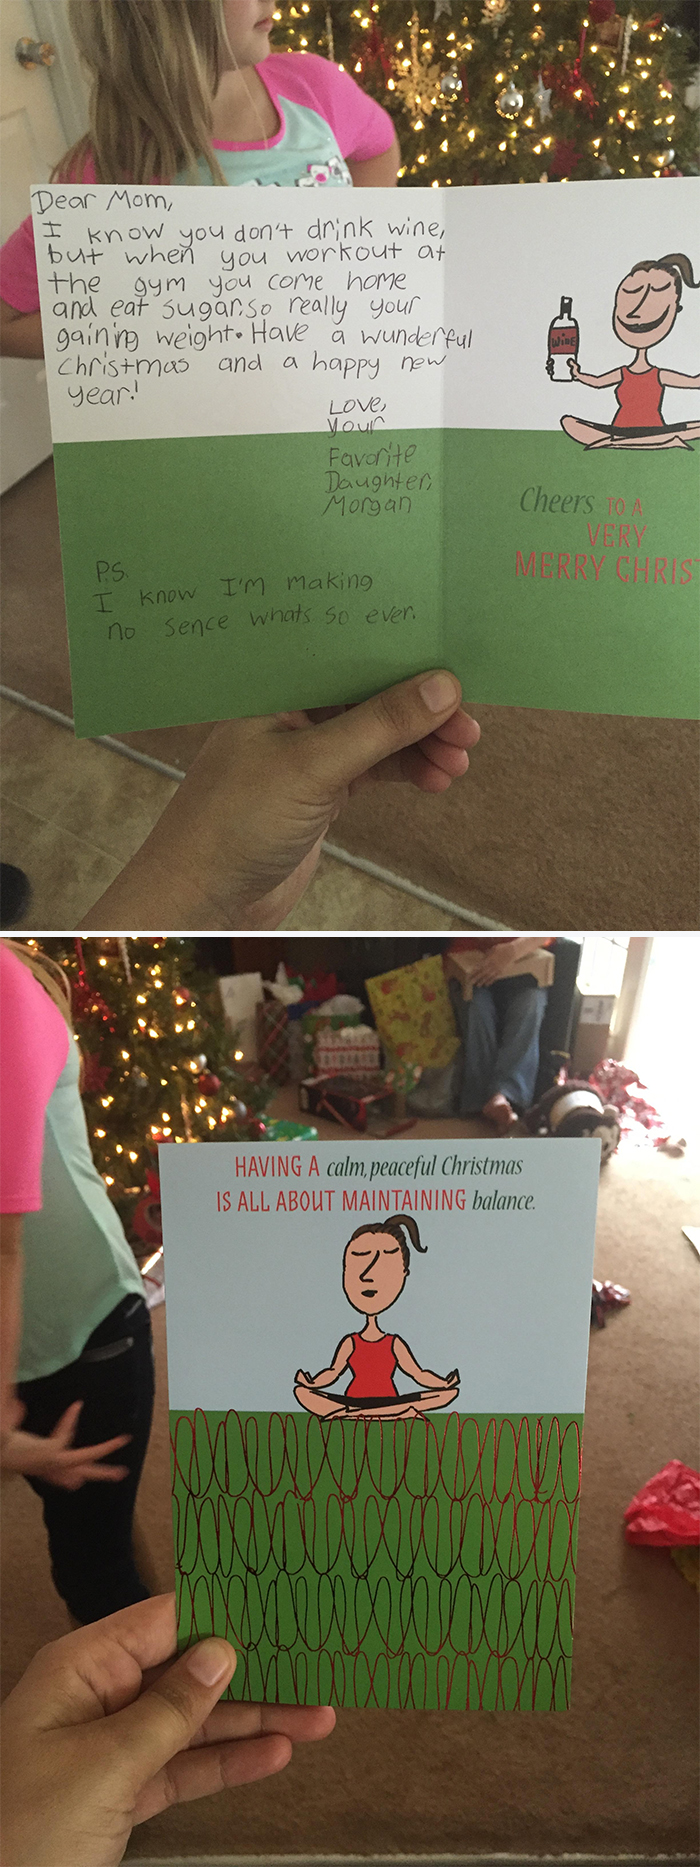 This Is The Christmas Card My 9 Year Old Niece Gave My Sister. Kids Are So Painfully Honest